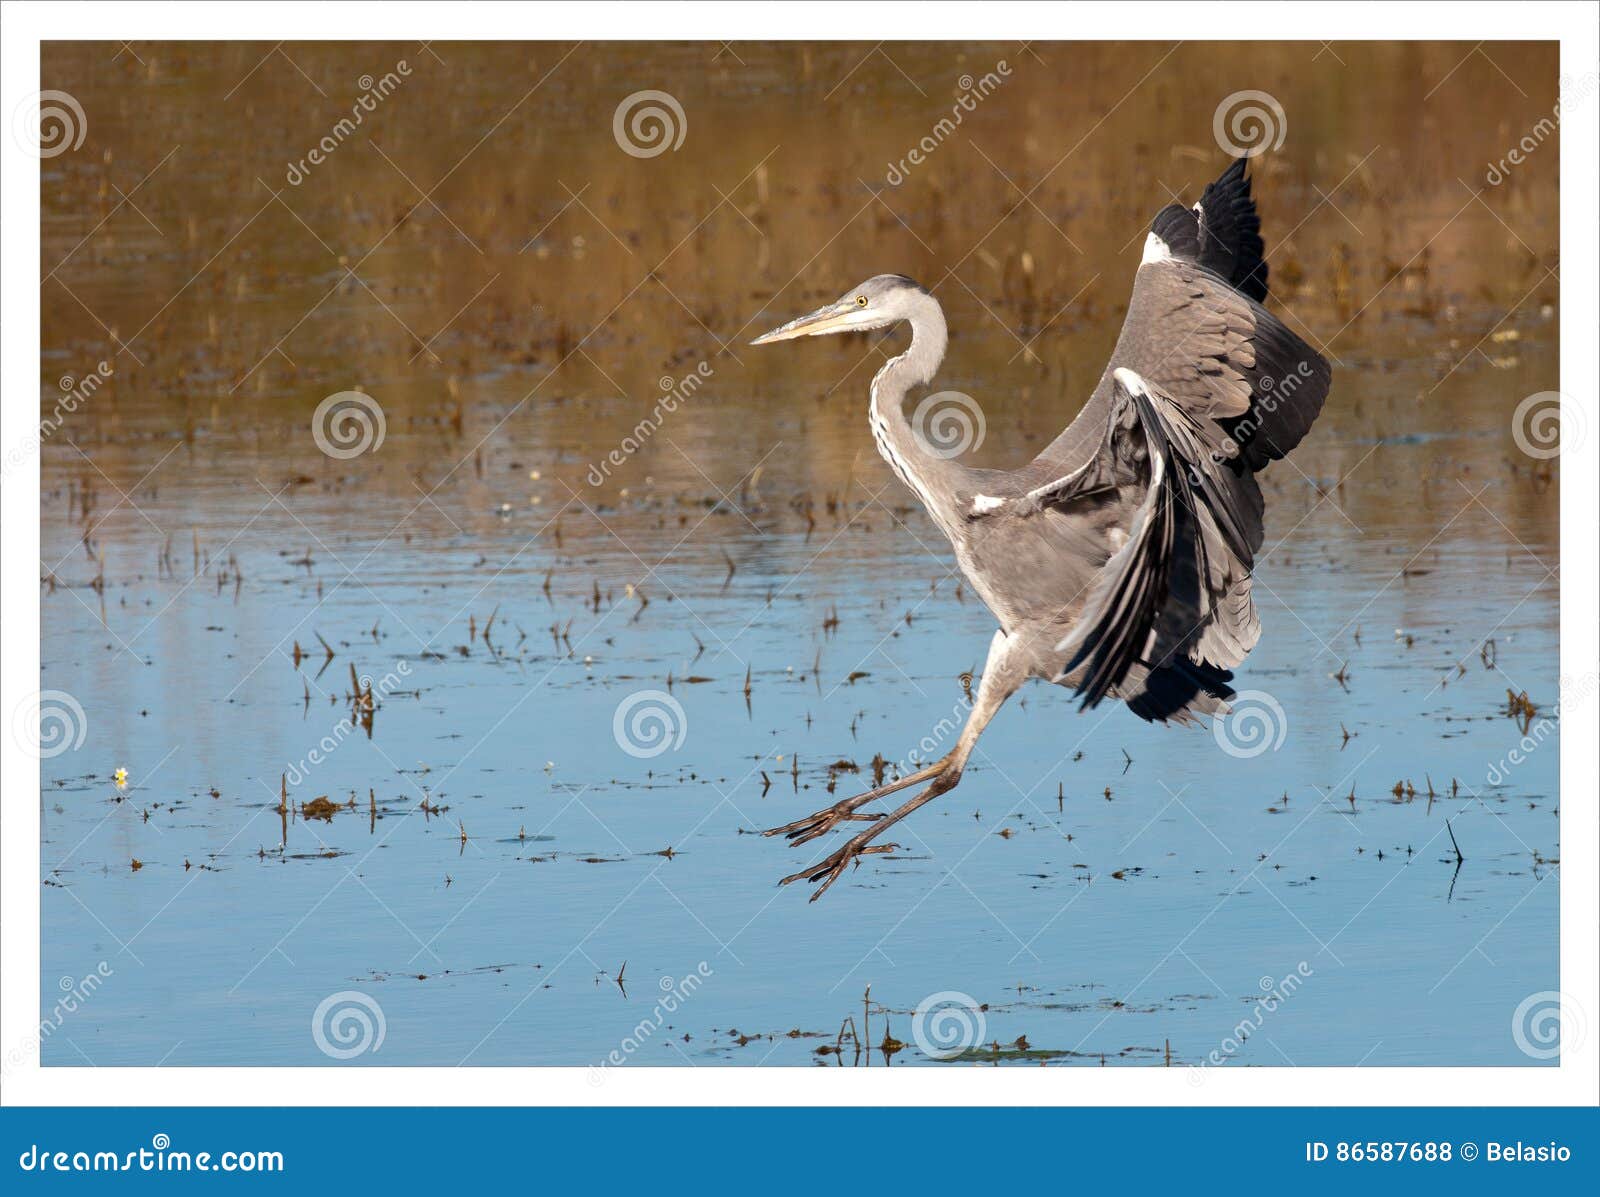 a great heron landing on the water